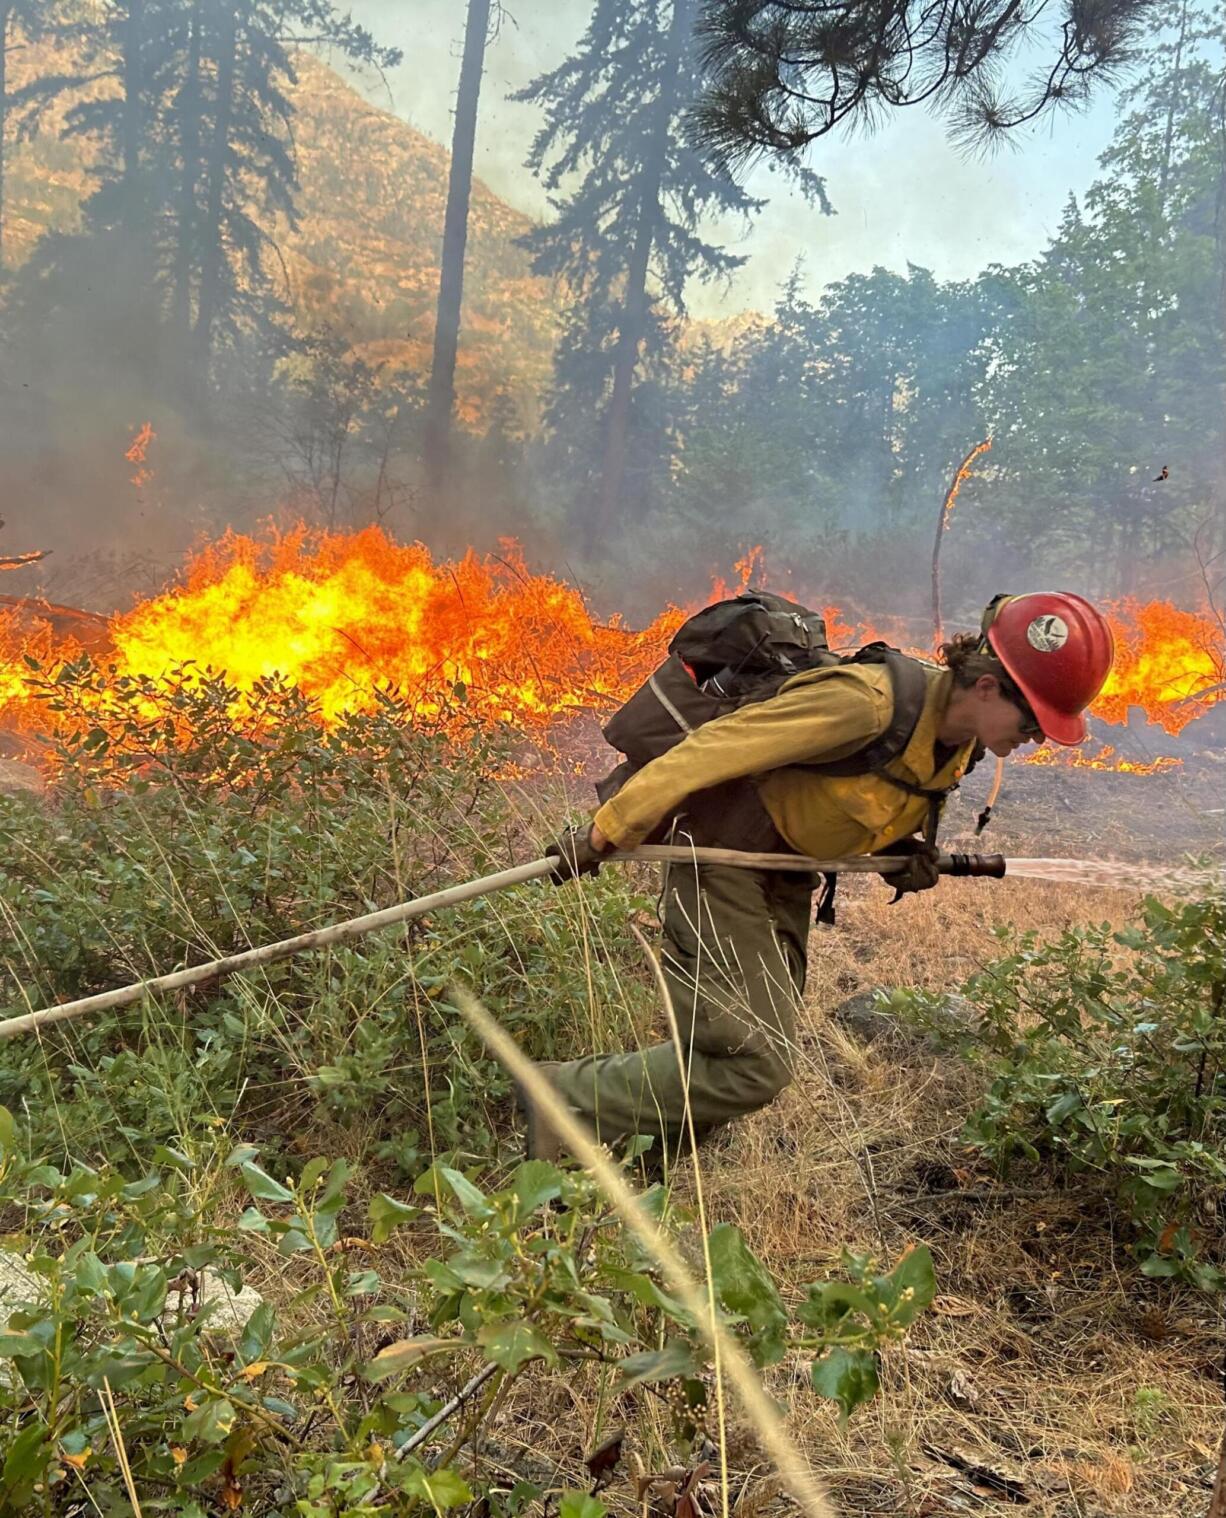 A firefighter pulls a hose with the Pioneer Fire burning in the background.